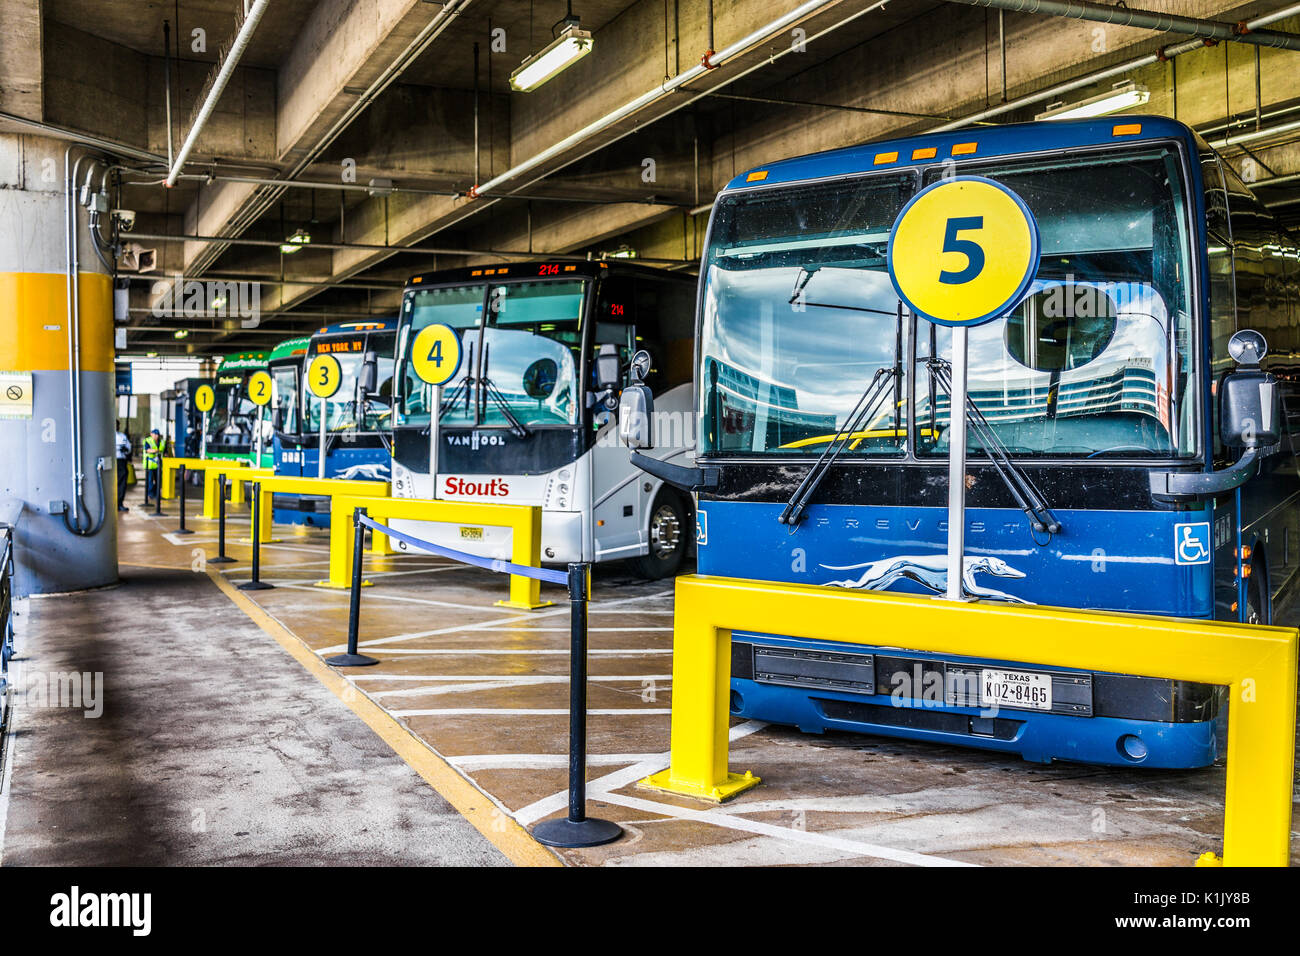 Washington DC, USA - July 1, 2017: Inside Union Station parking garage in capital city with row of buses Stock Photo